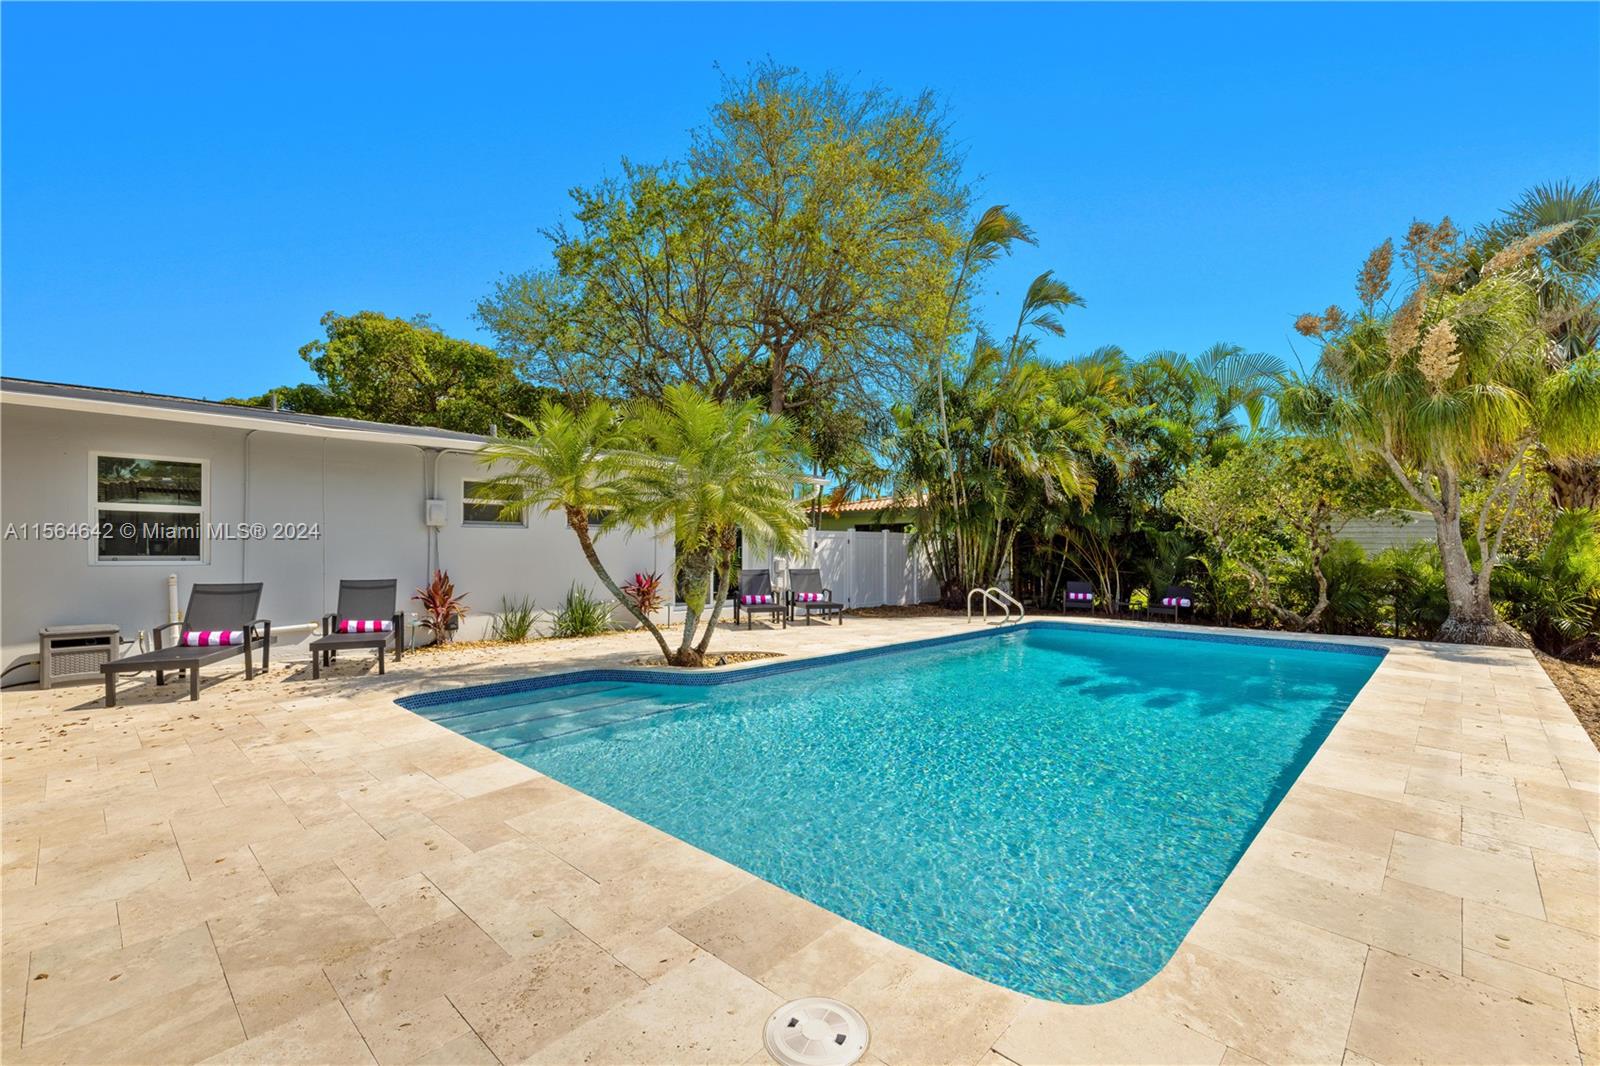 Property for Sale at Address Not Disclosed, Wilton Manors, Broward County, Florida - Bedrooms: 3 
Bathrooms: 3  - $949,000